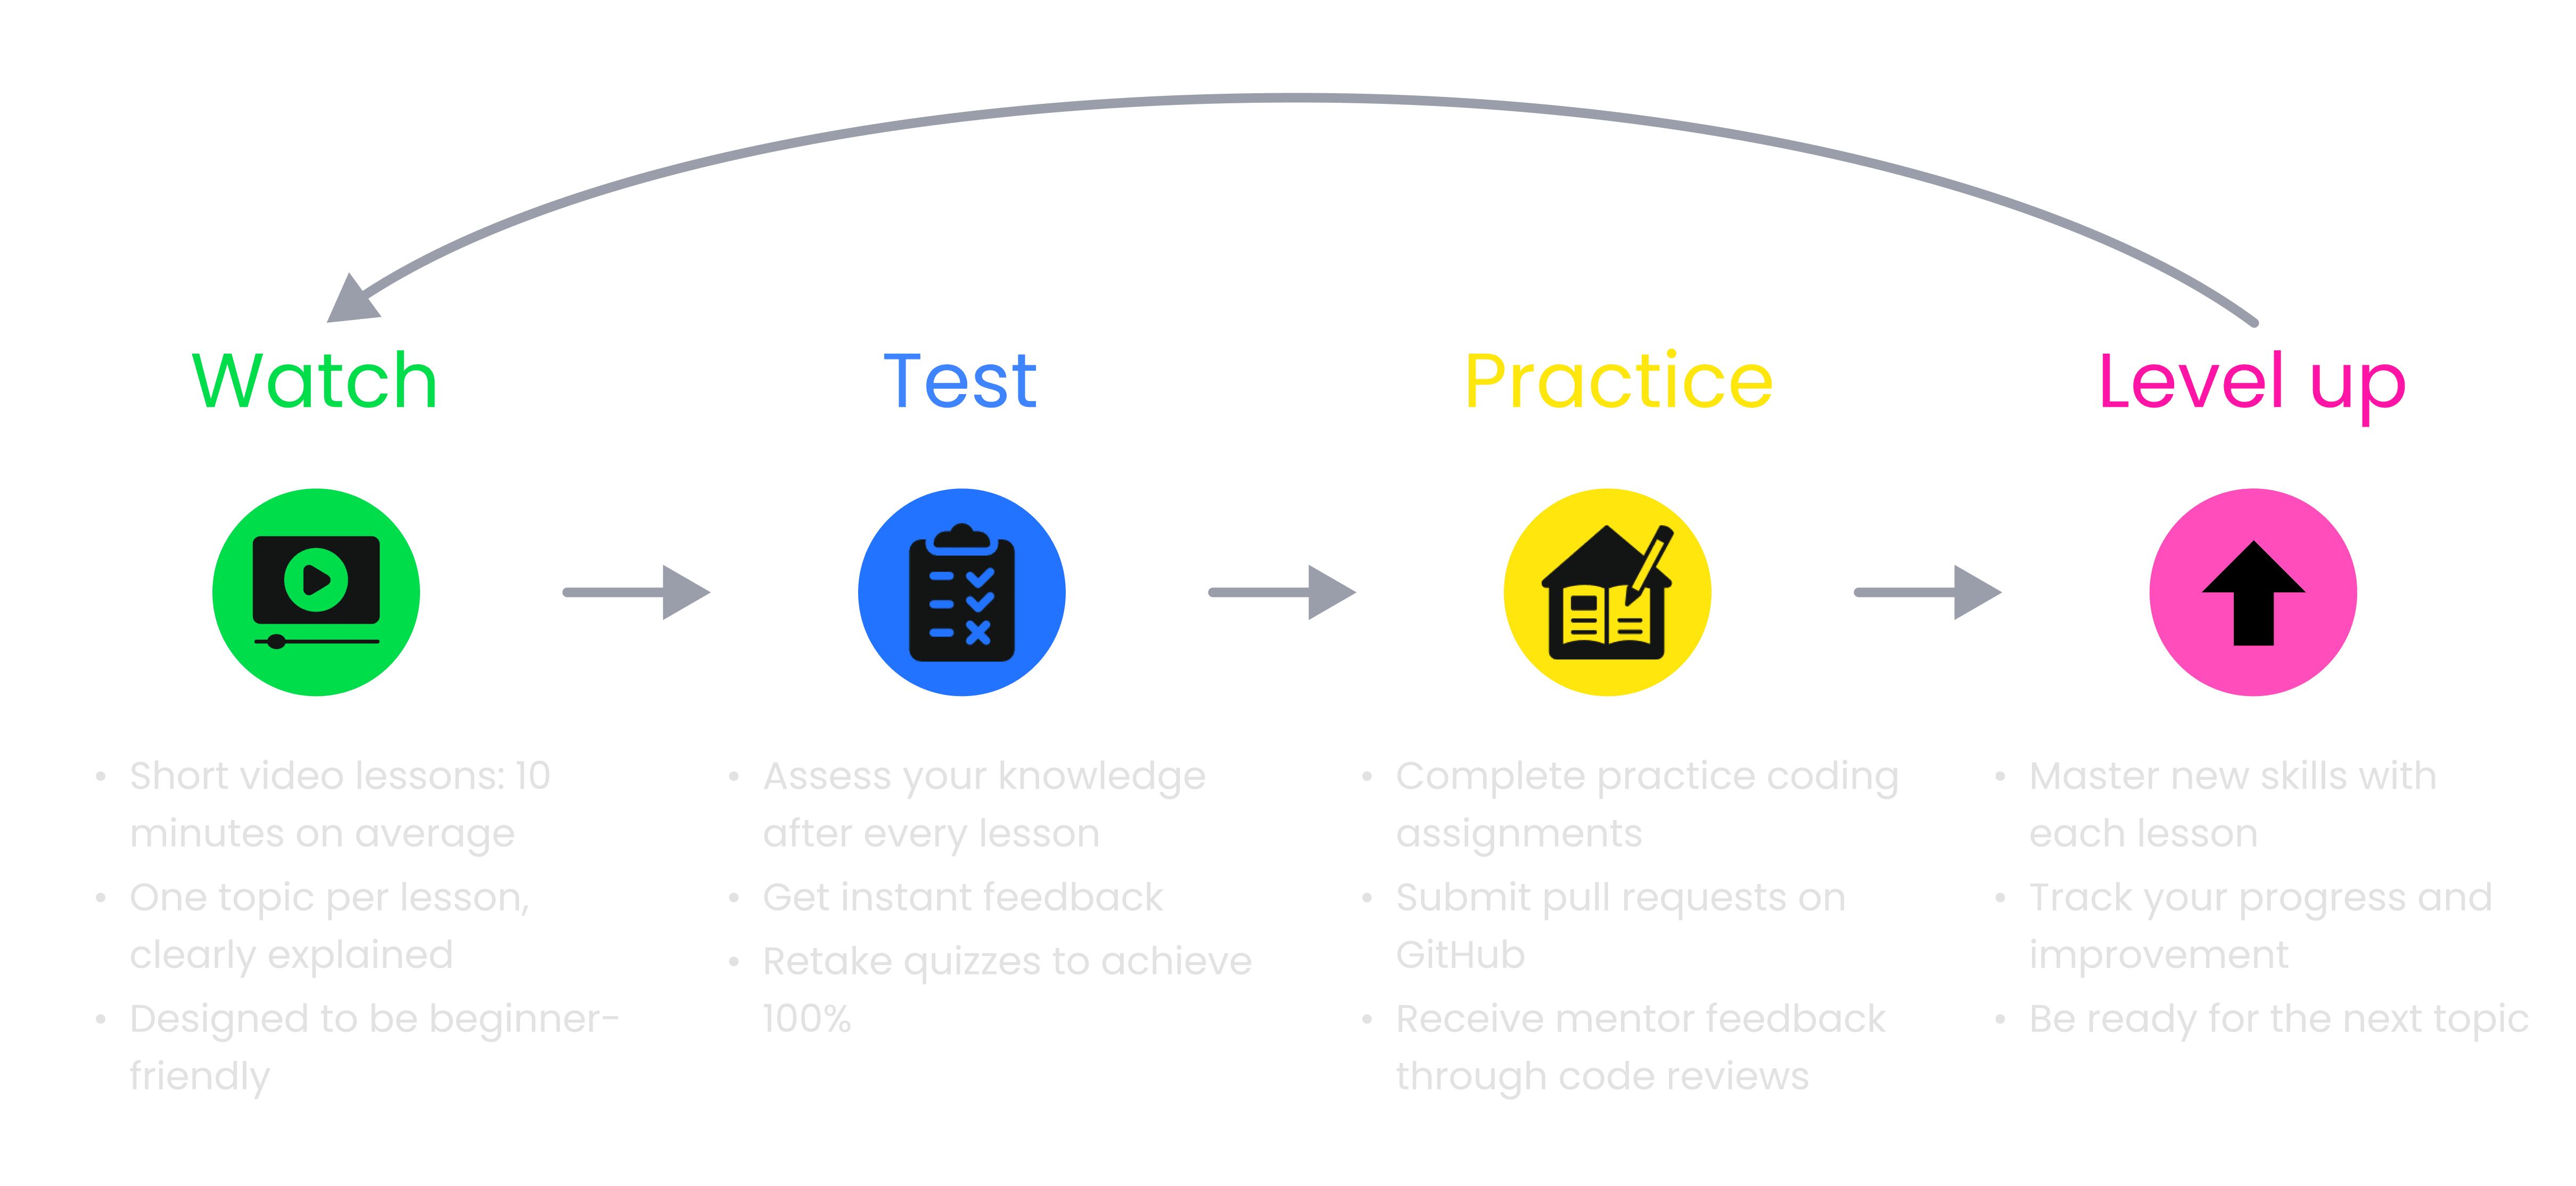 Learn By Doing image: Watch, Test, Practice, Level Up